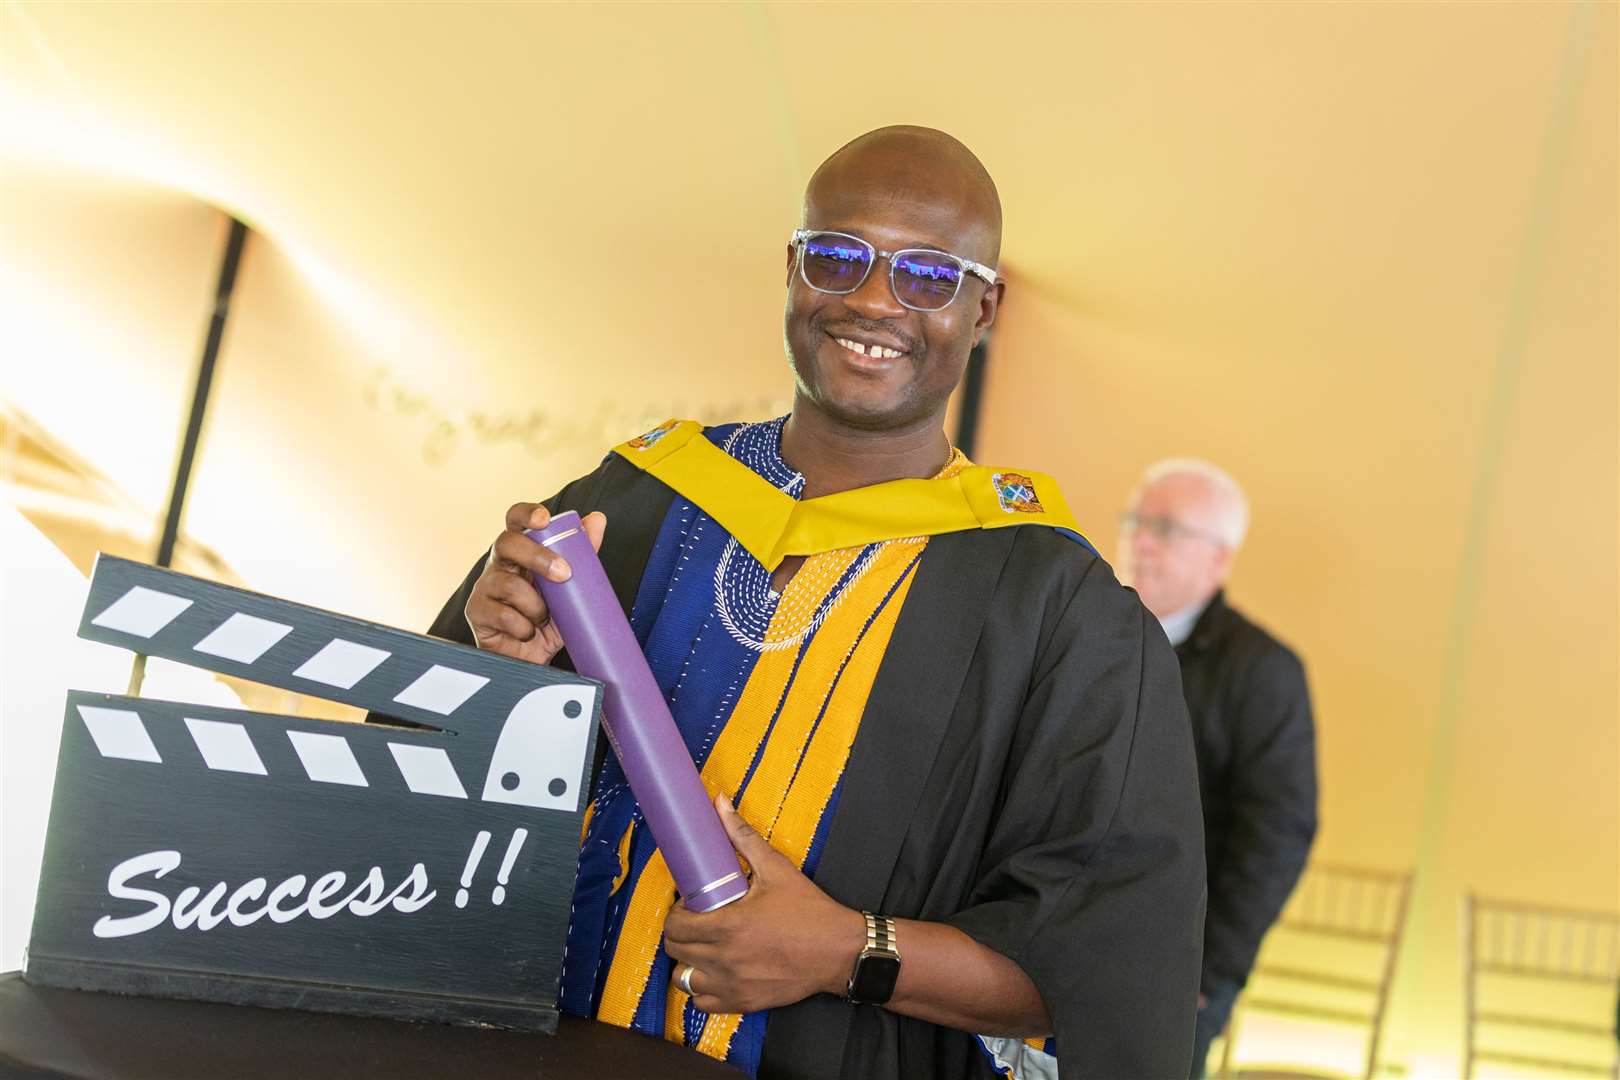 Sanda Kodimah graduated from UHI Inverness in 2020 with a PDA Health and Social Care – Administration of Medication and now works for Centred, a mental health charity in Inverness.